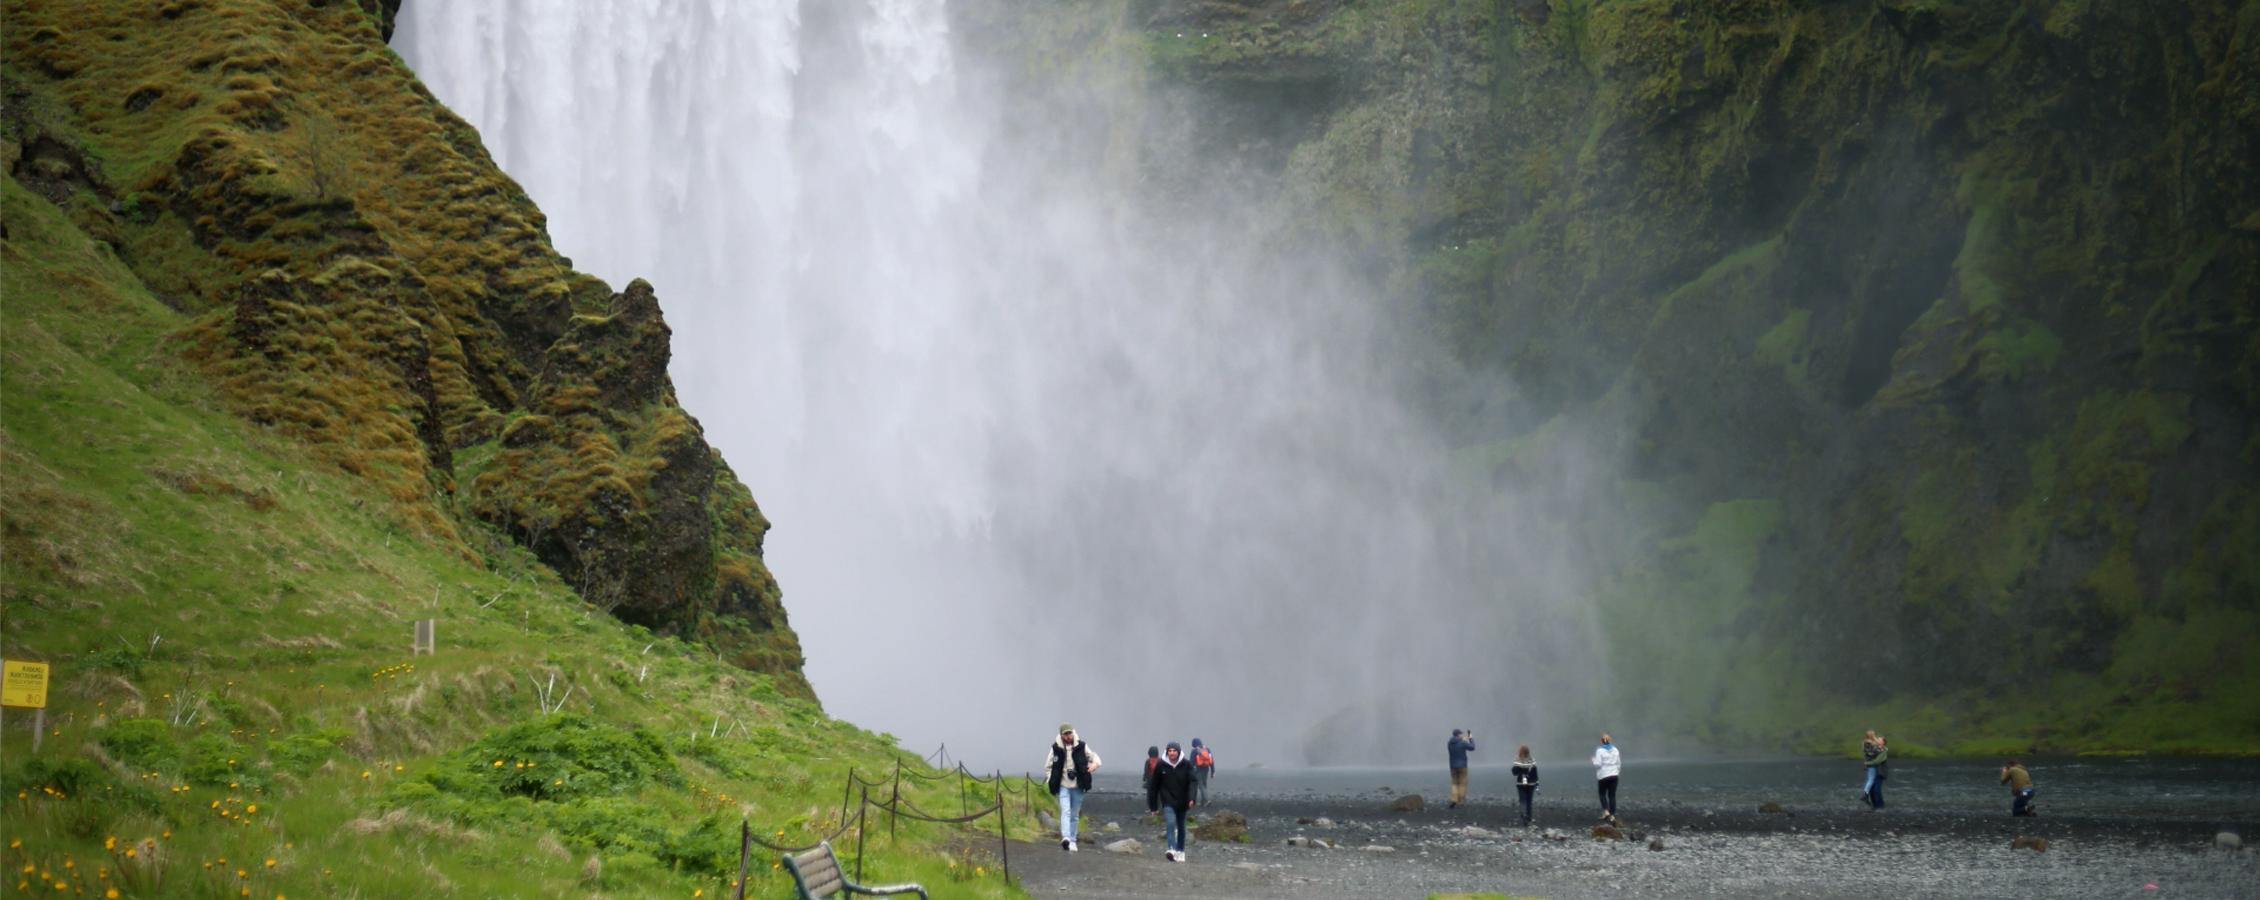 Students walk along a path by a waterfall.